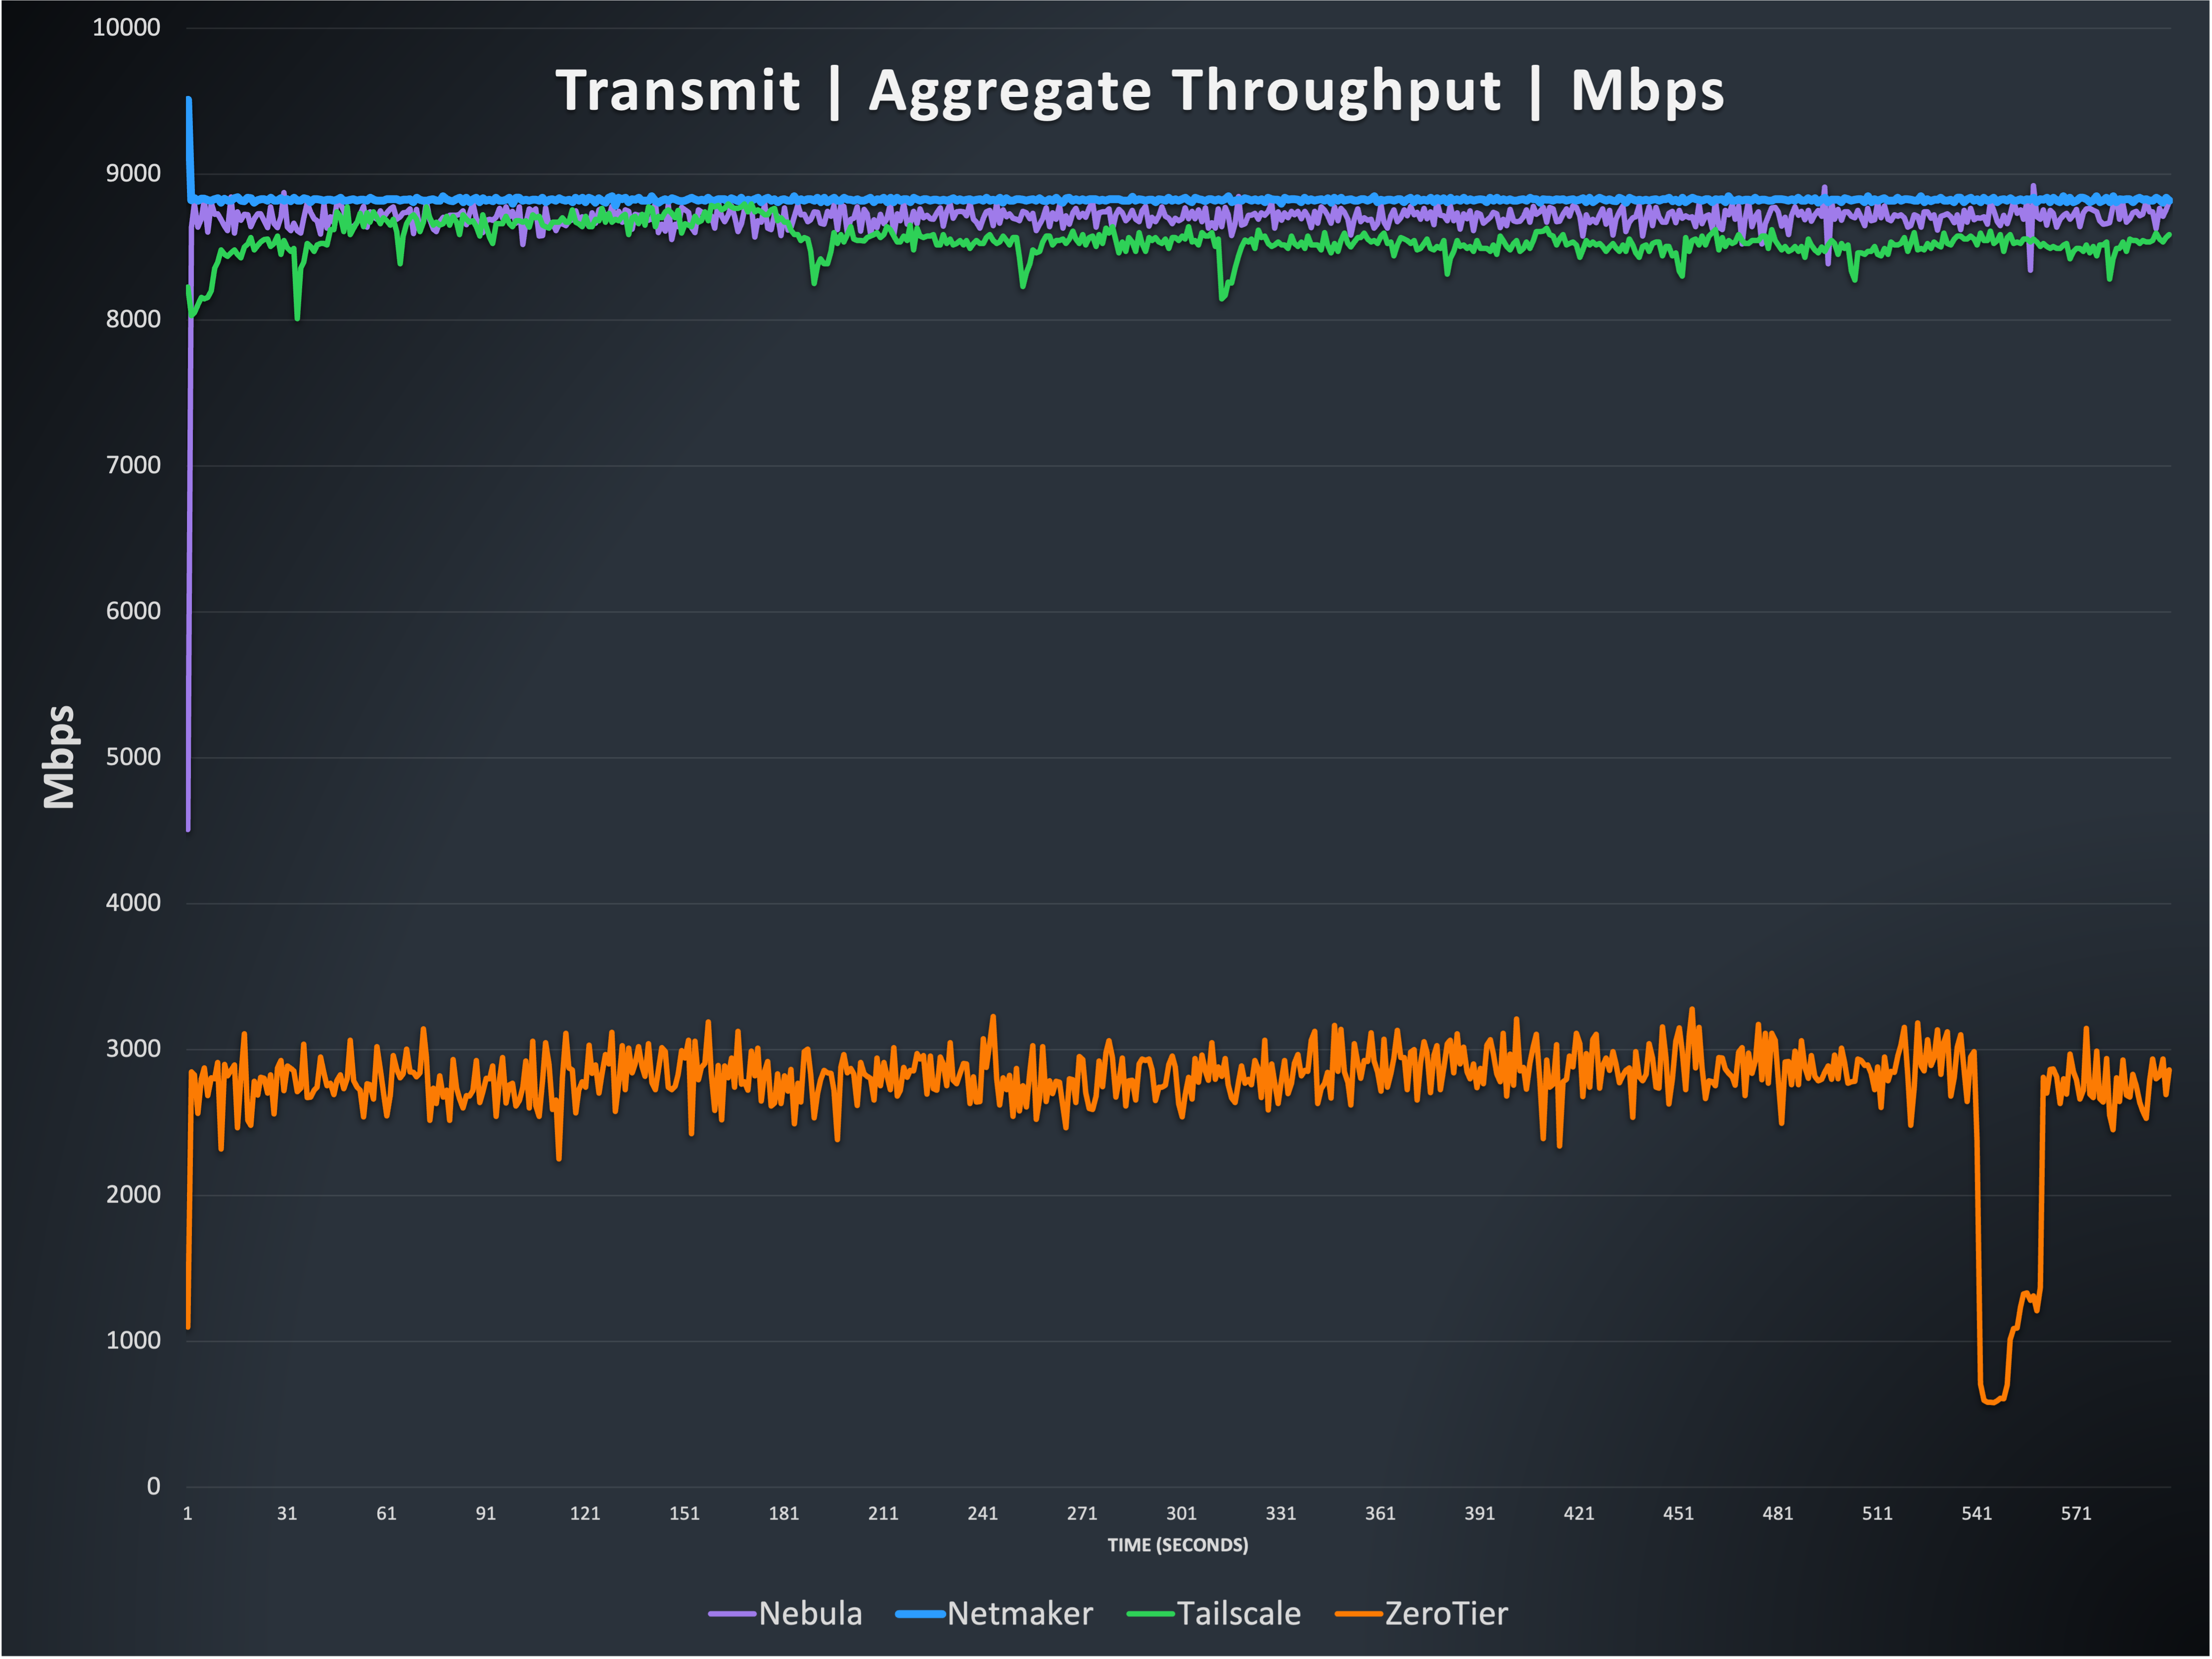 Line graph showing aggregate transmit throughput of Nebula, Netmaker, Tailscale, and ZeroTier.  Nebula, Netmaker, and Tailscale have steady lines just below 9000 Mbps, and ZeroTier hovers just below 3000 Mbps, with a drop to about 800 Mbps for 30 seconds or so towards the end of the 10 minute test.